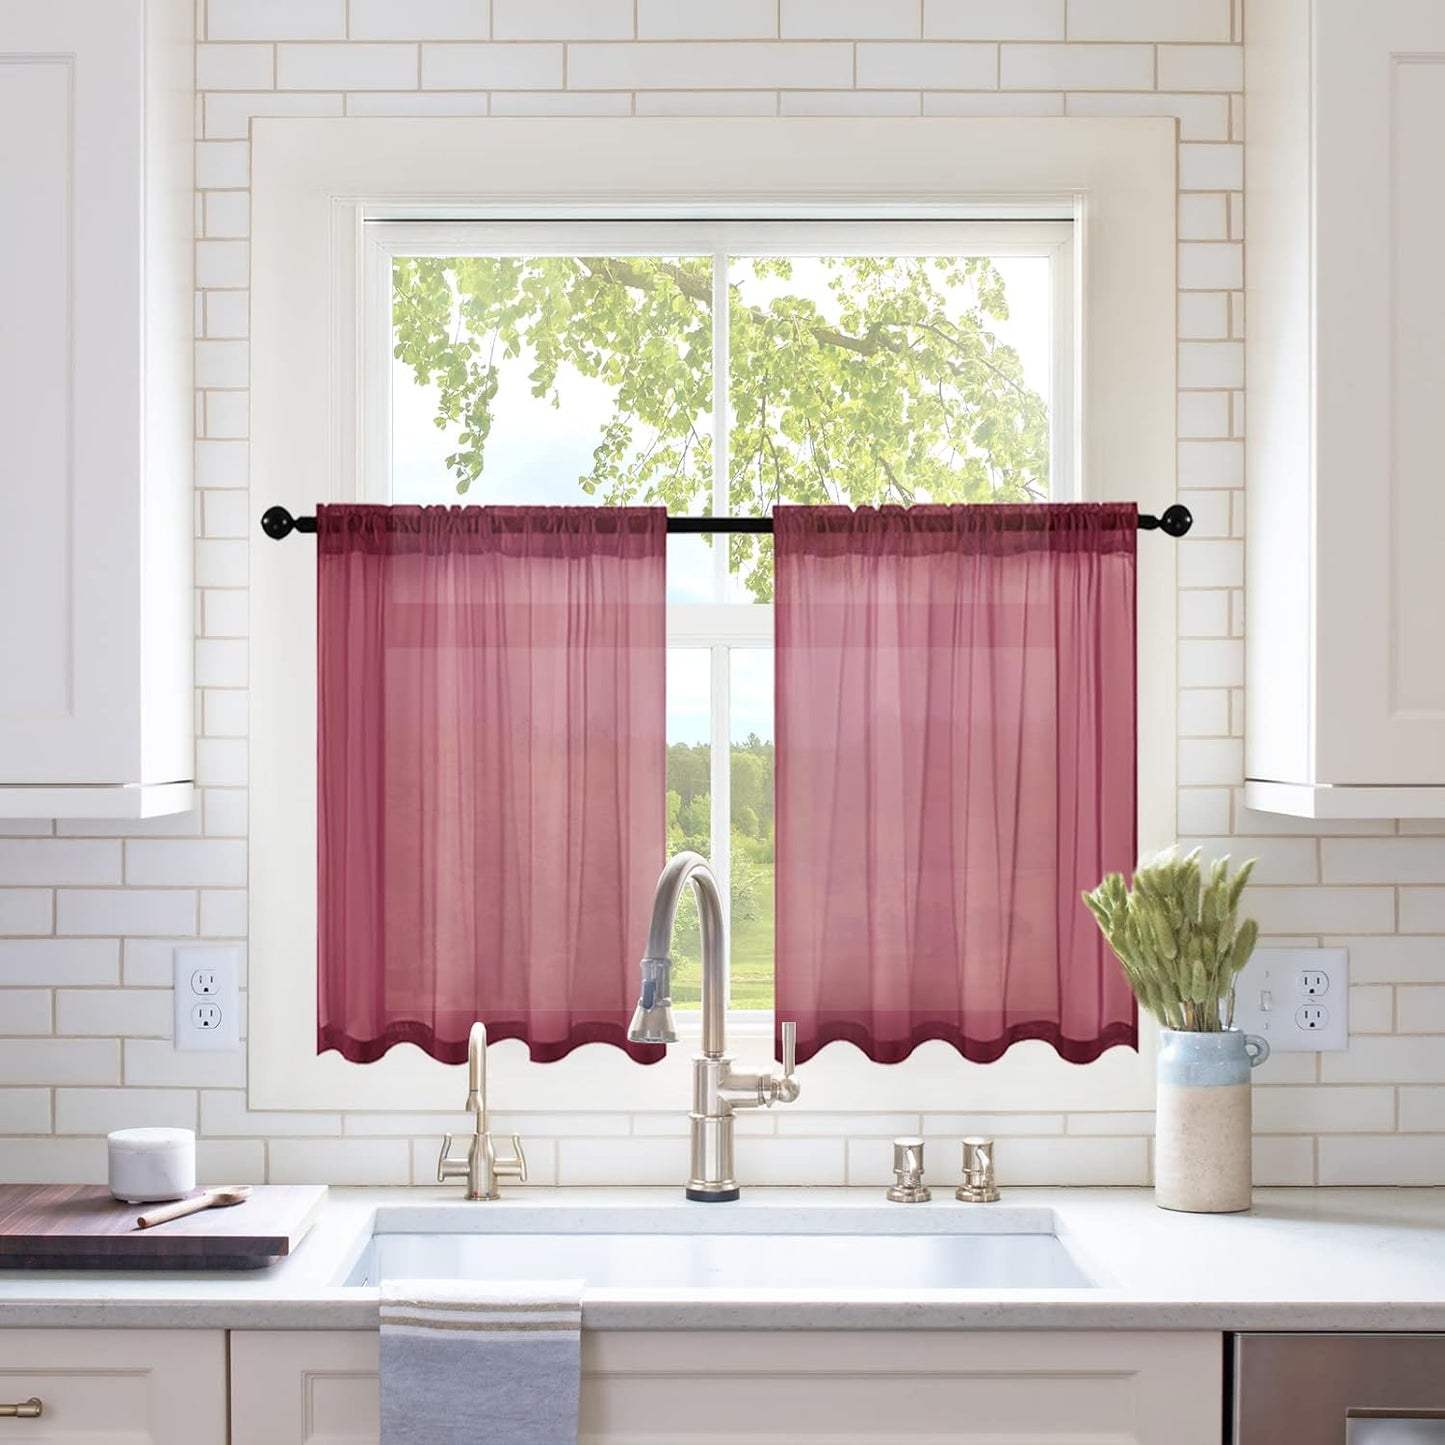 MIULEE White Sheer Curtains 96 Inches Long Window Curtains 2 Panels Solid Color Elegant Window Voile Panels/Drapes/Treatment for Bedroom Living Room (54 X 96 Inches White)  MIULEE Maroon Red 29''W X 30''L 